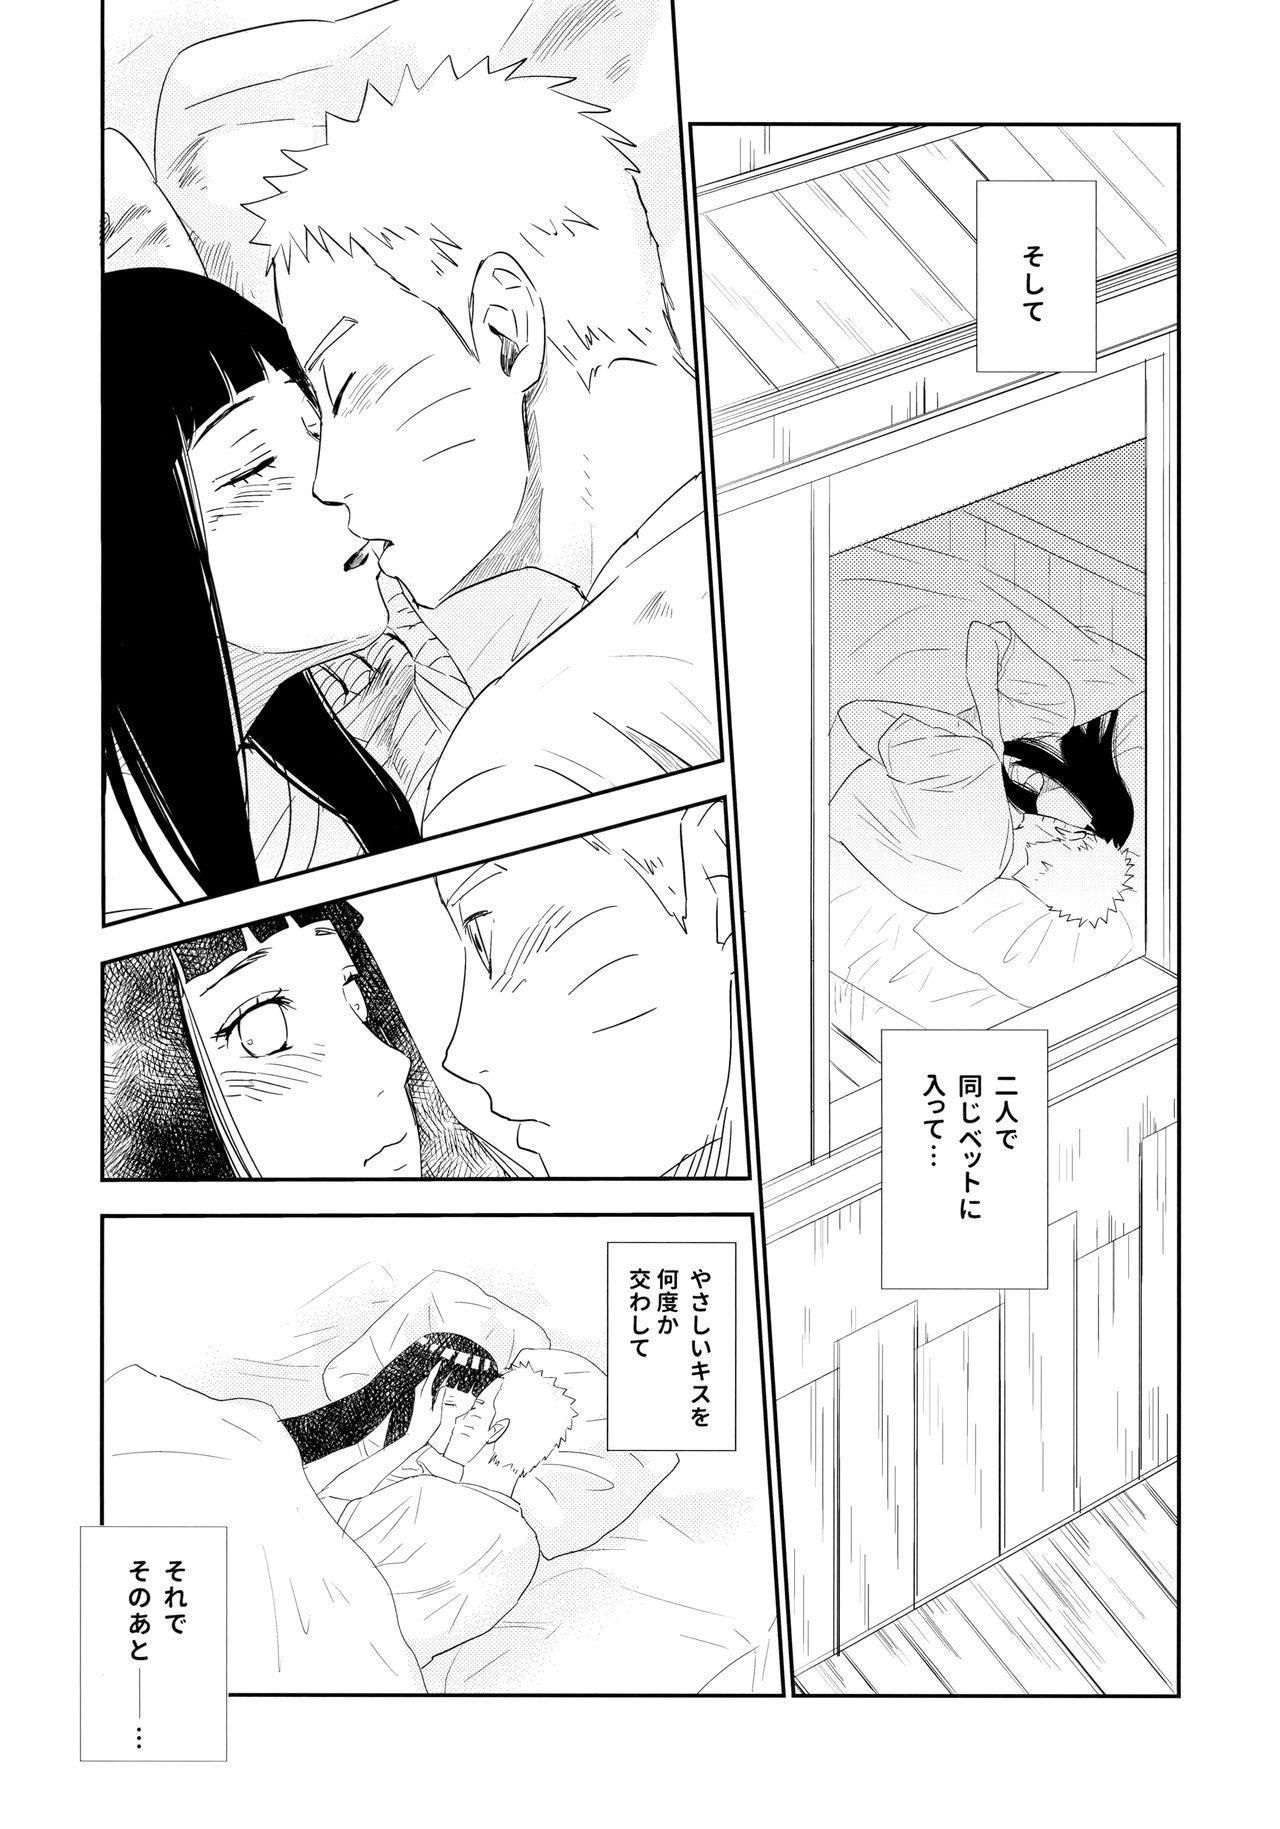 Groping PRESENT - Naruto 4some - Page 6